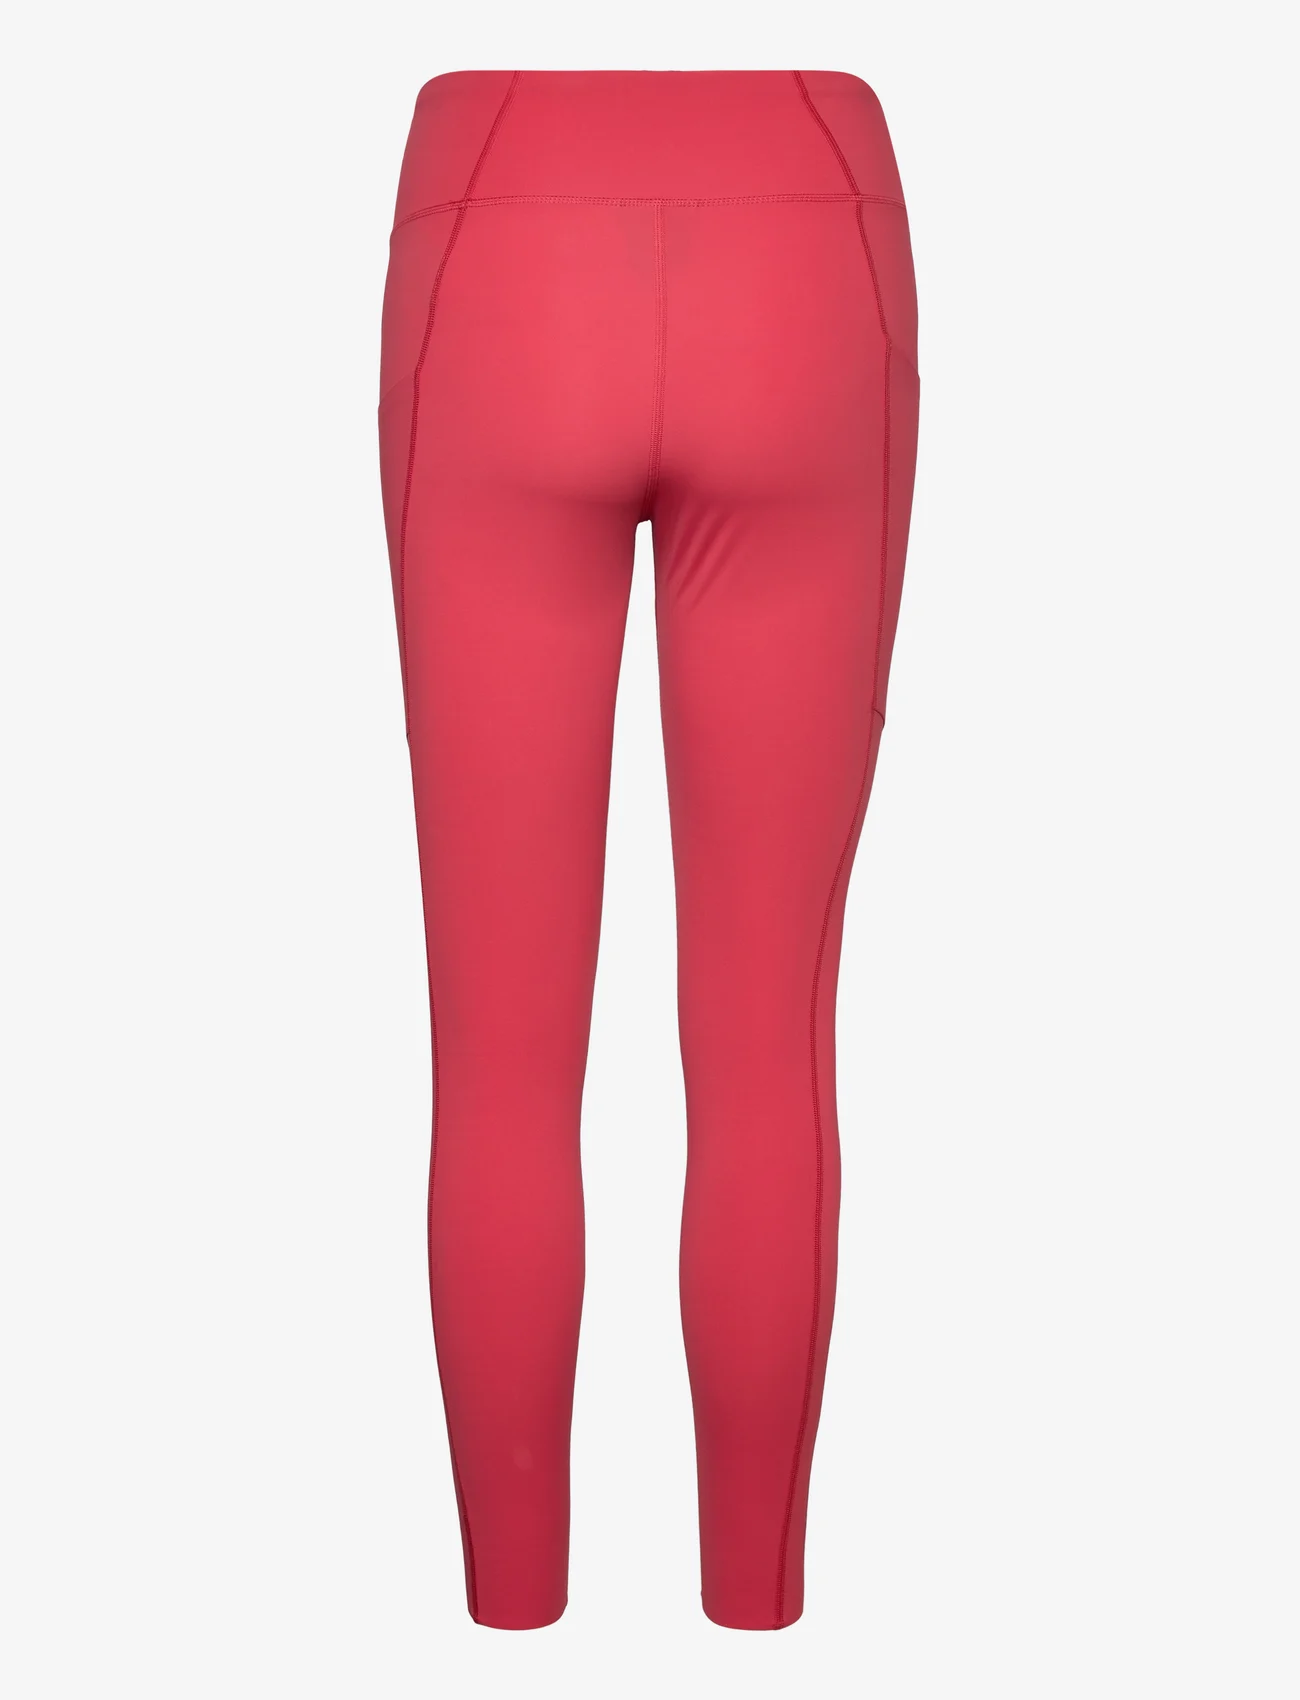 Peak Performance - W Power Tights-SOFTER RED - running & training tights - softer red - 1